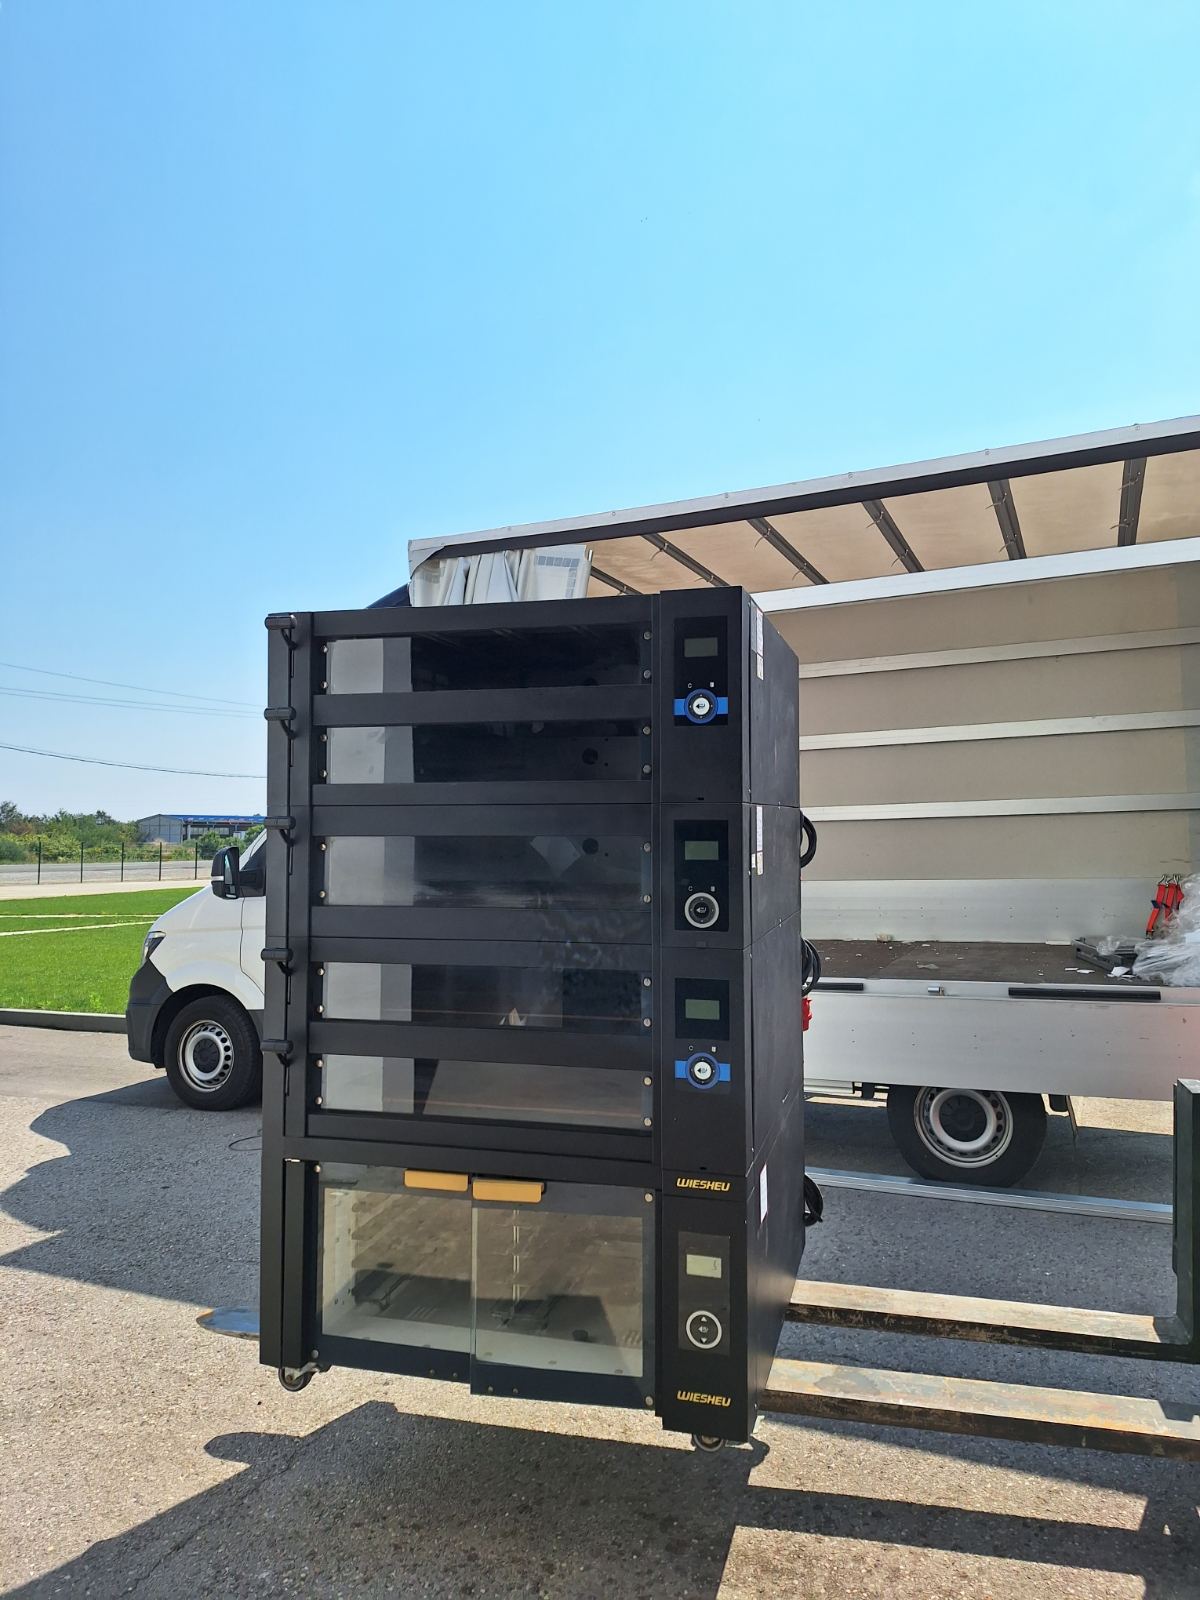 Delivery of bakery and catering equipment for a customer in Nis, Serbia